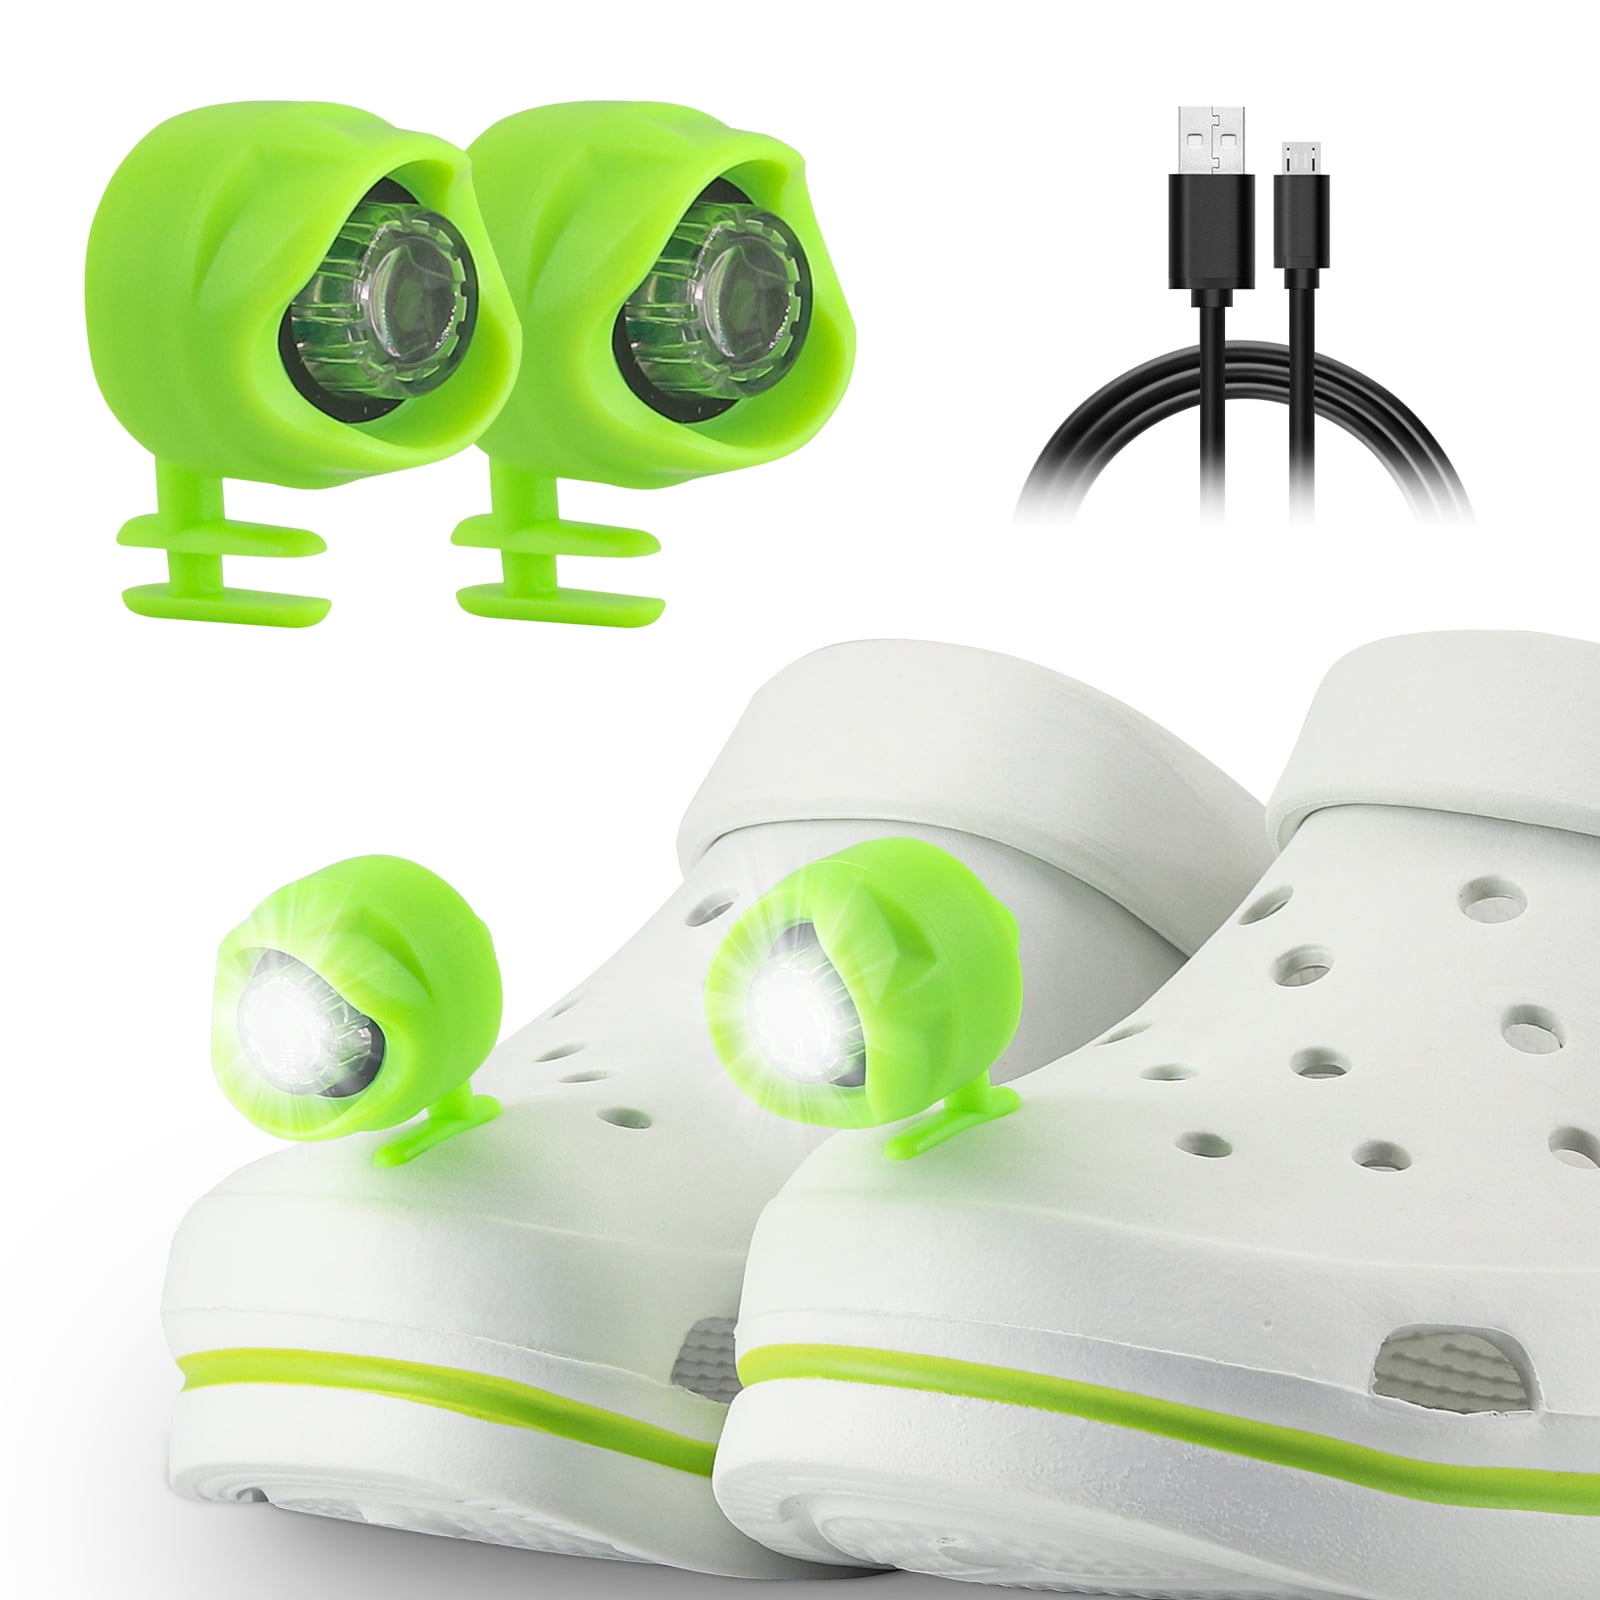 Dress Up Your Crocs with Charms: A Fun and Easy Way to